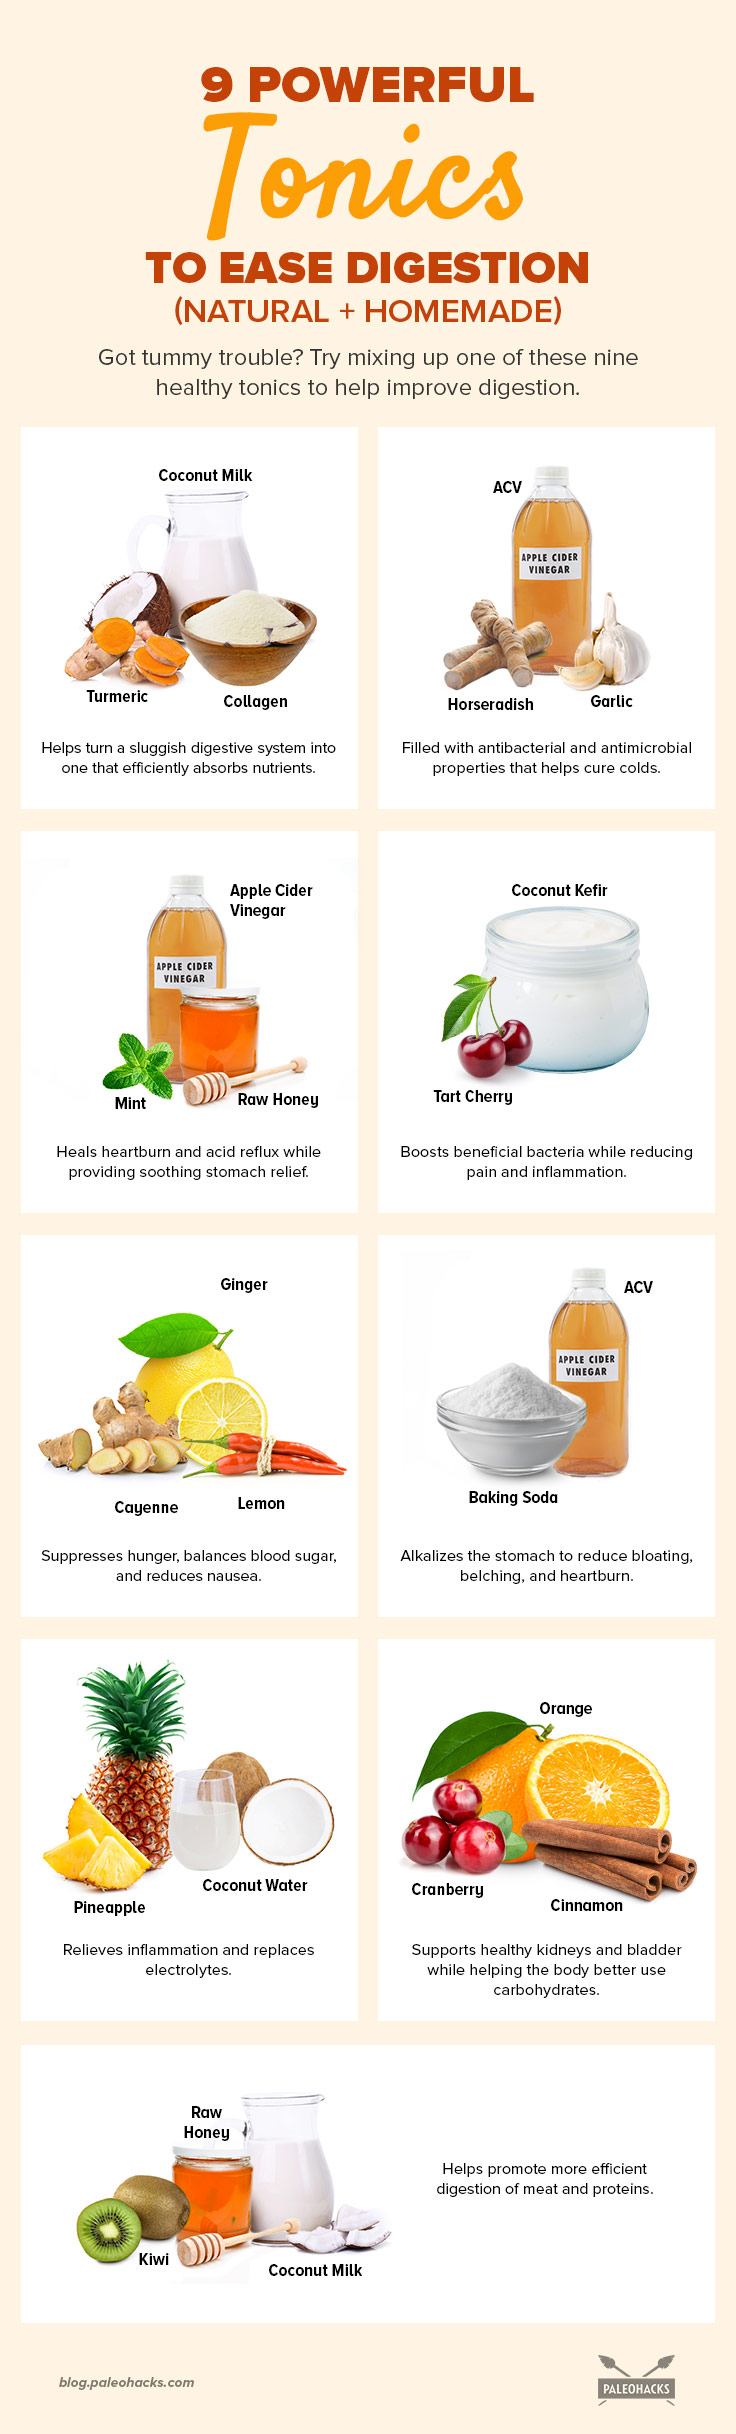 Digestive tonics have been used for centuries to improve digestion, reduce inflammation, and more. Drink these healing tonics for tummy trouble.